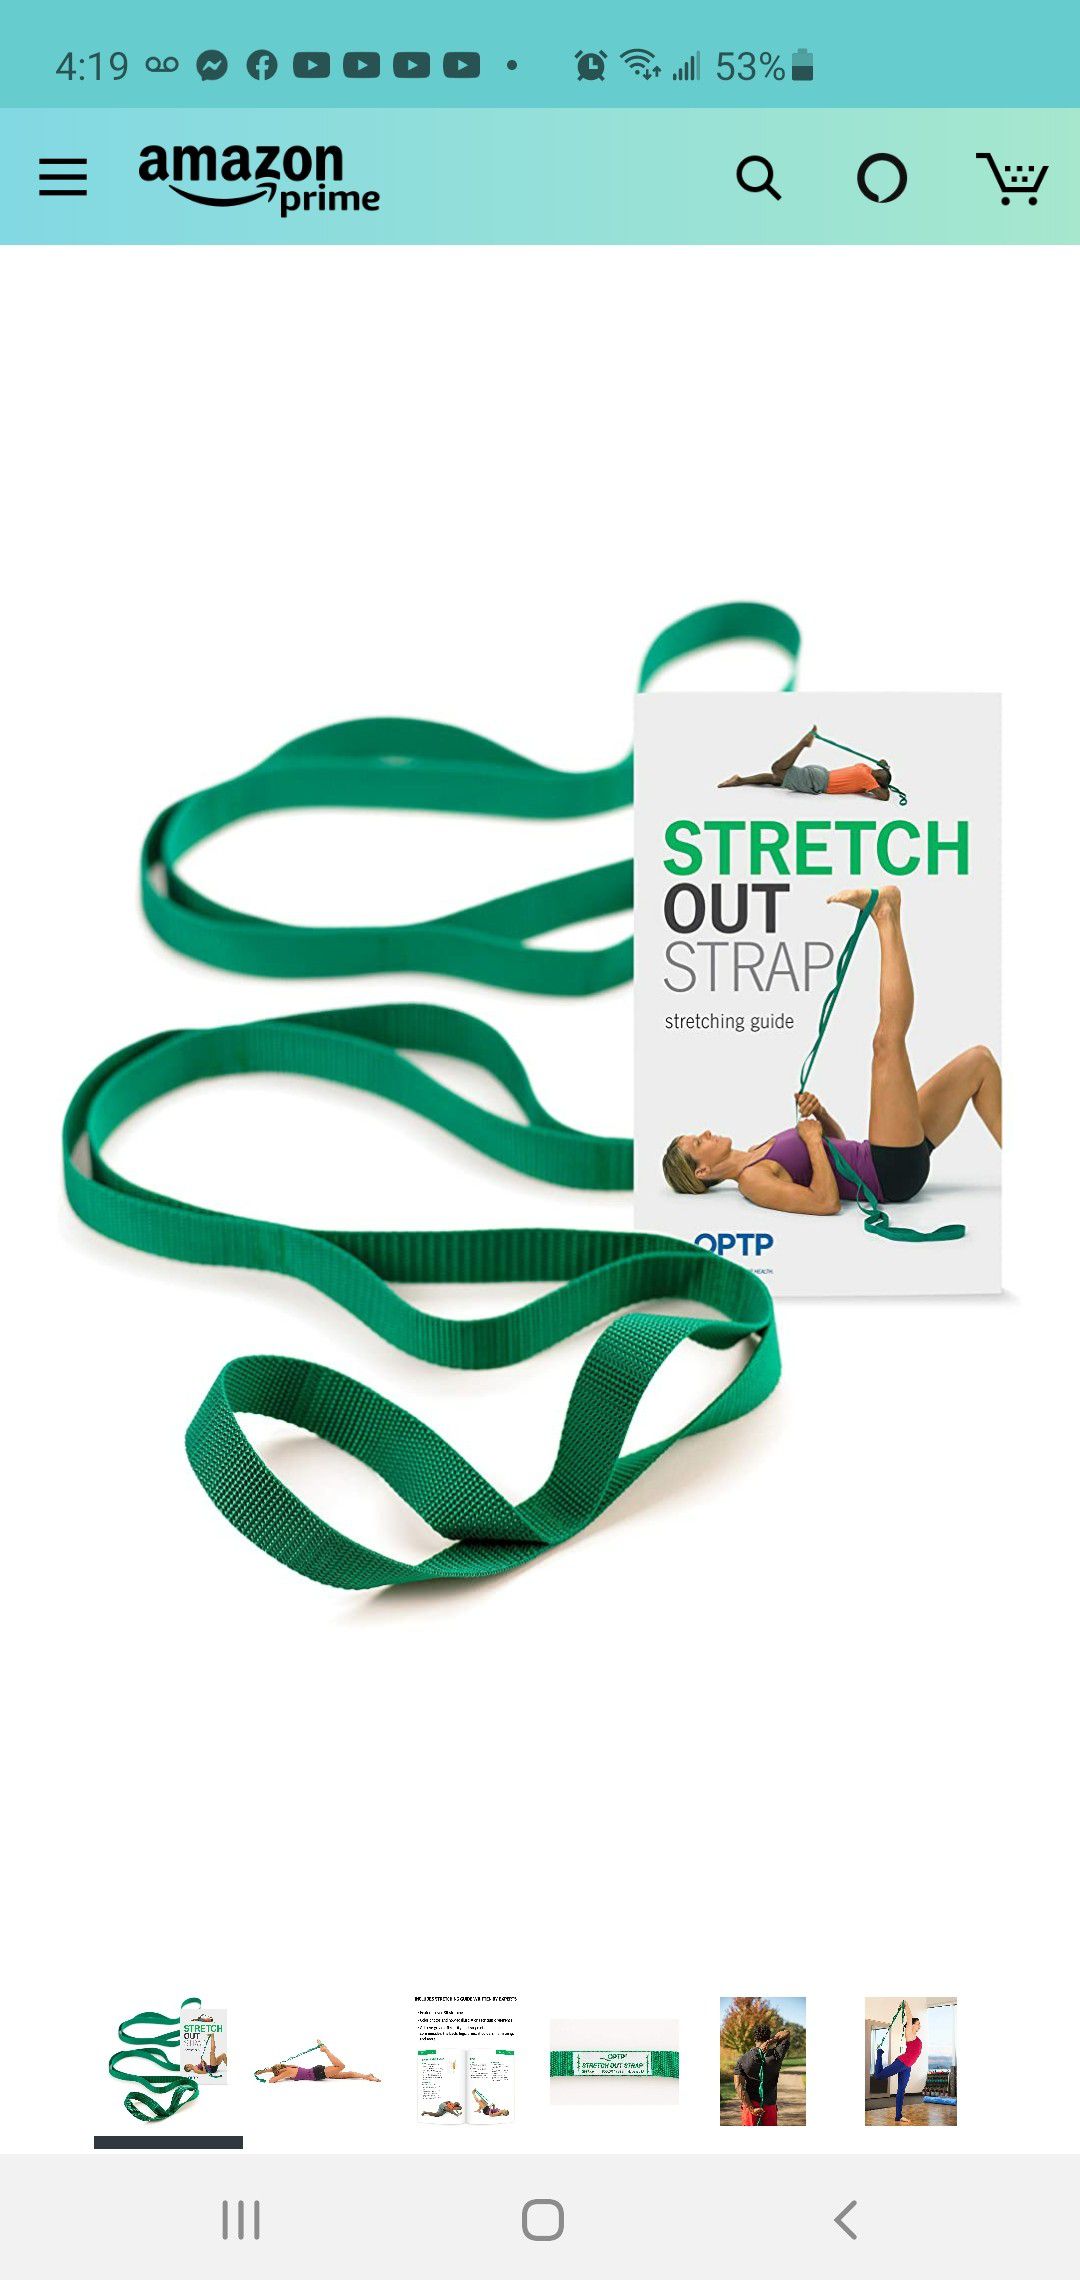 Stretch out strap